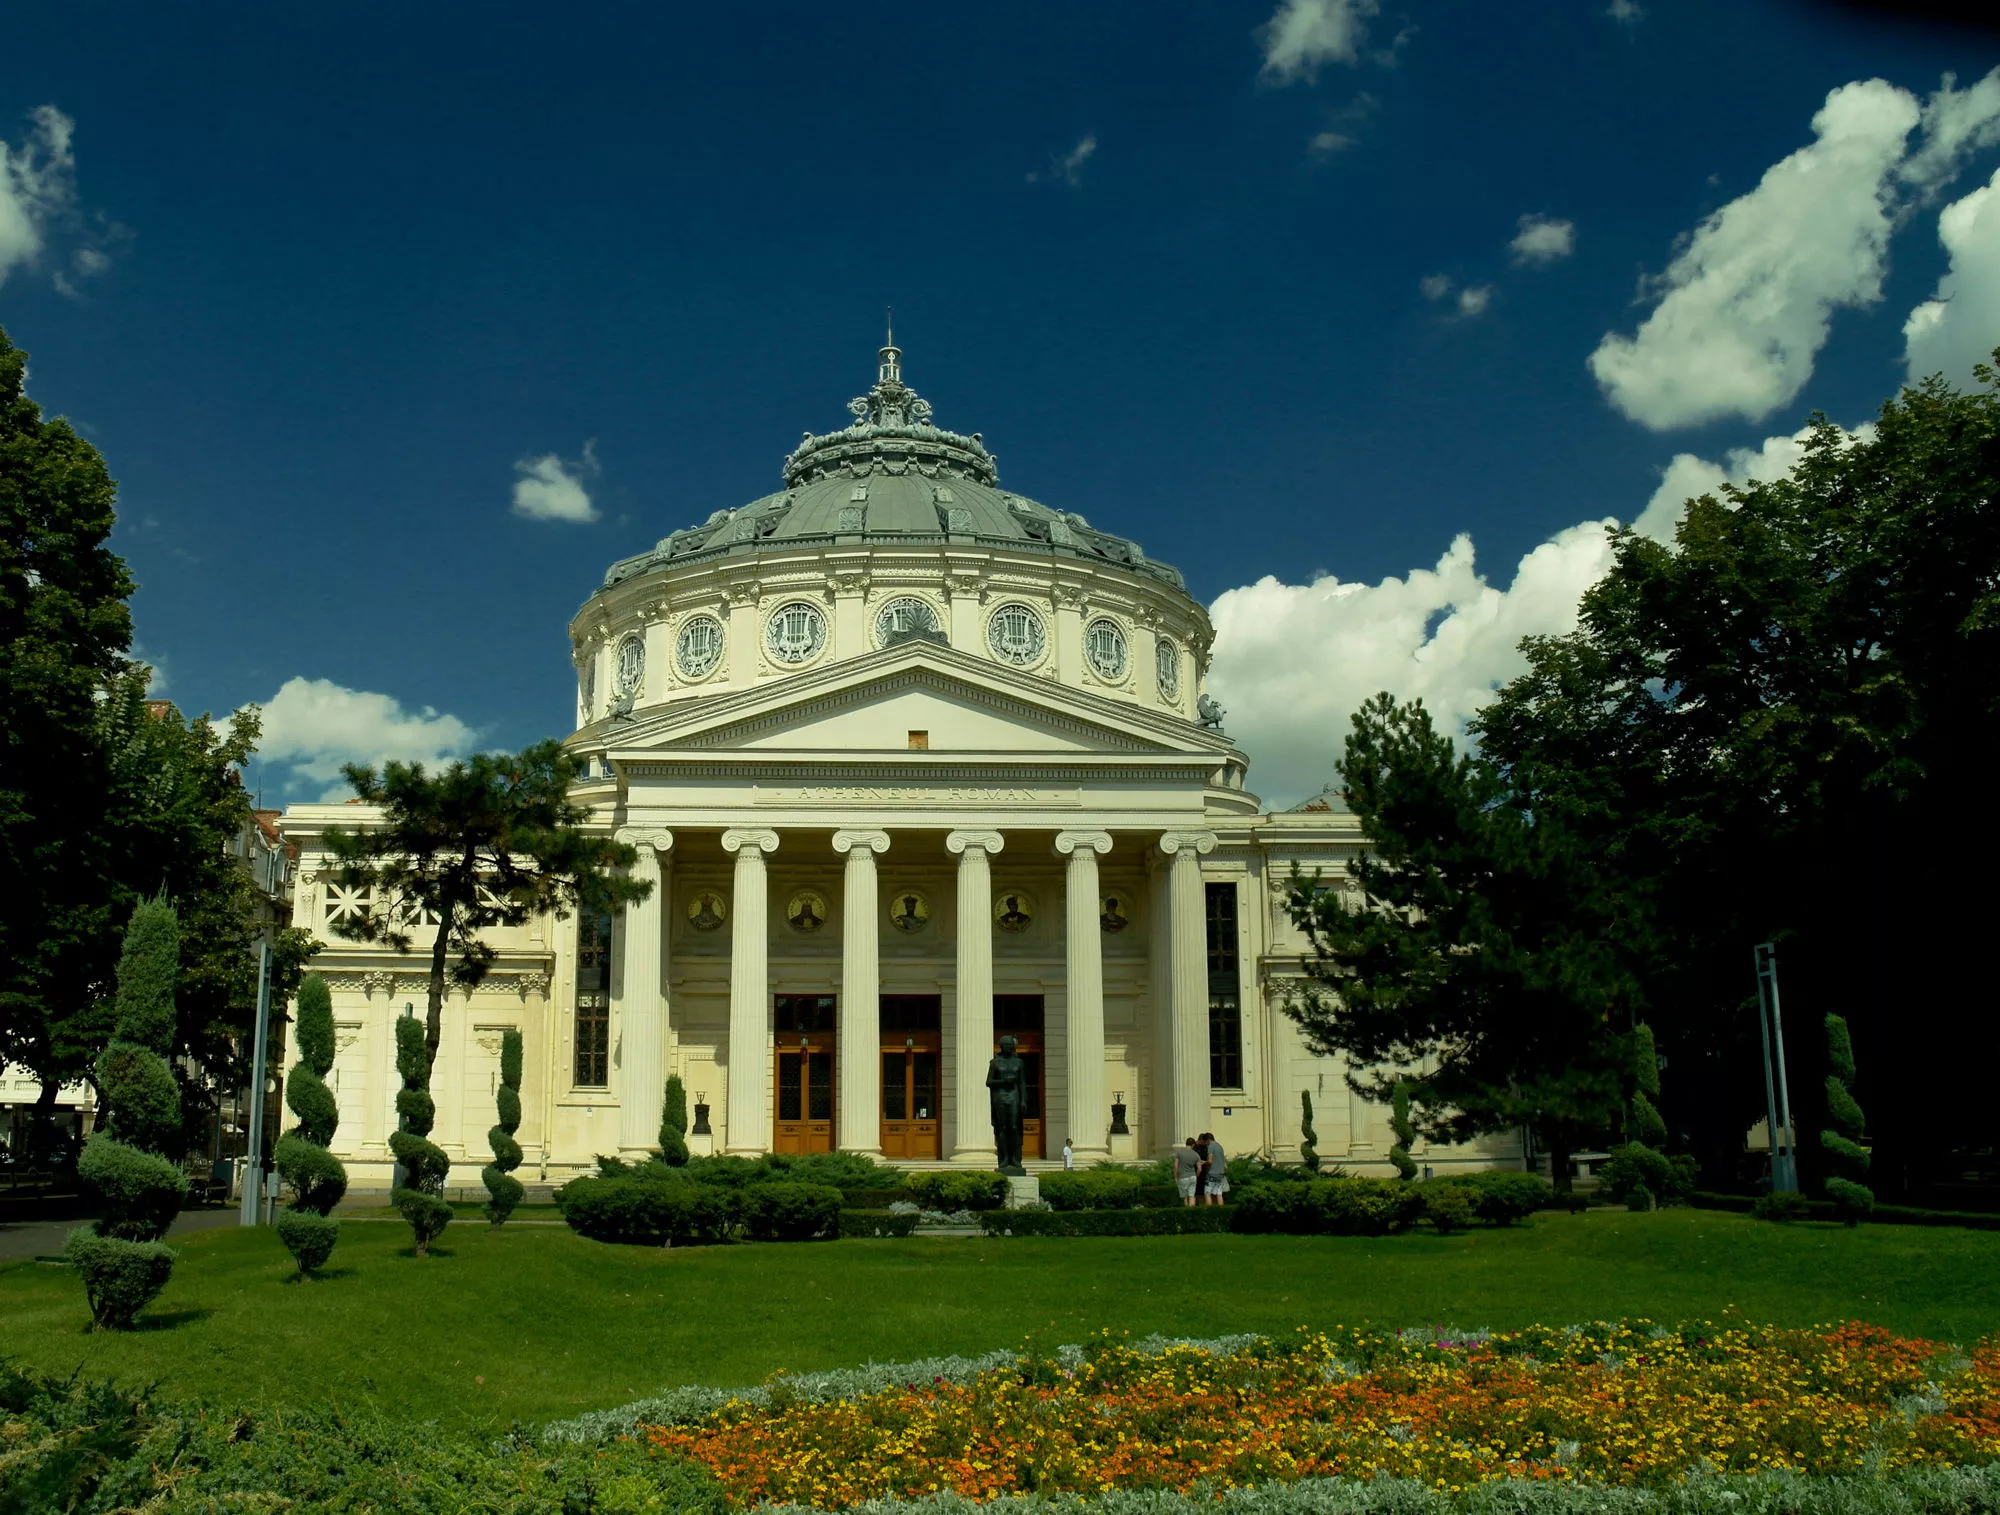 Romanian Athenaeum in Romania, Europe | Architecture,Theaters - Rated 4.9